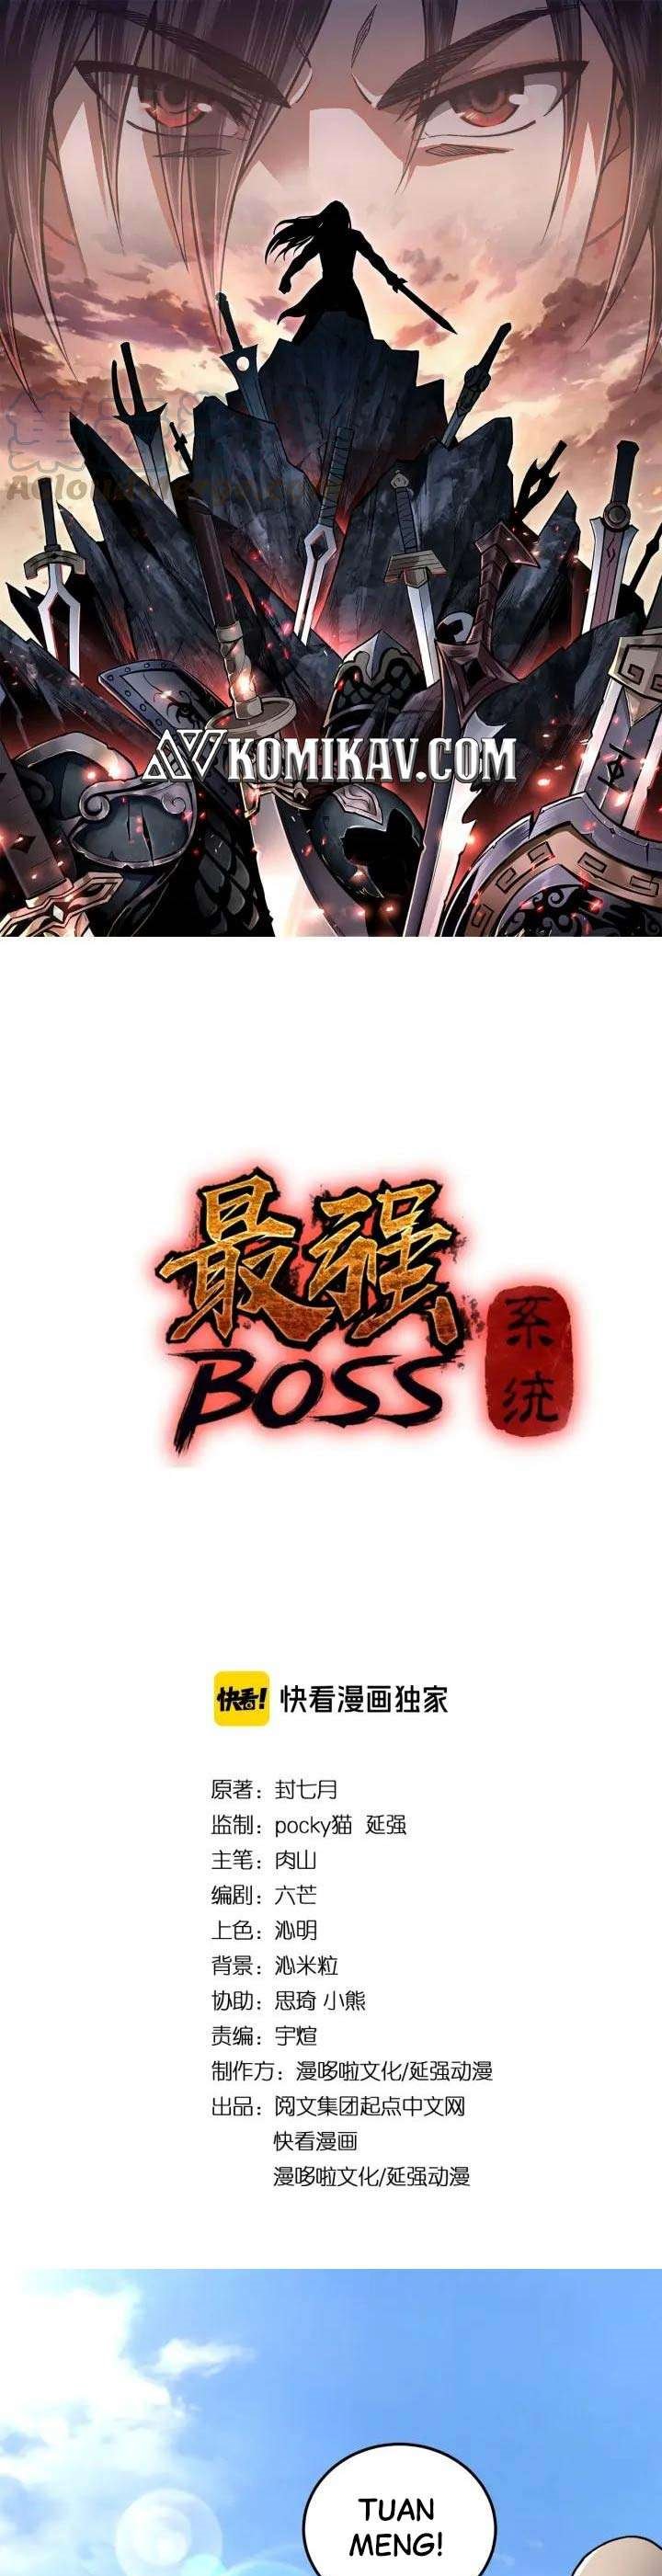 Greatest Boss System Chapter 66